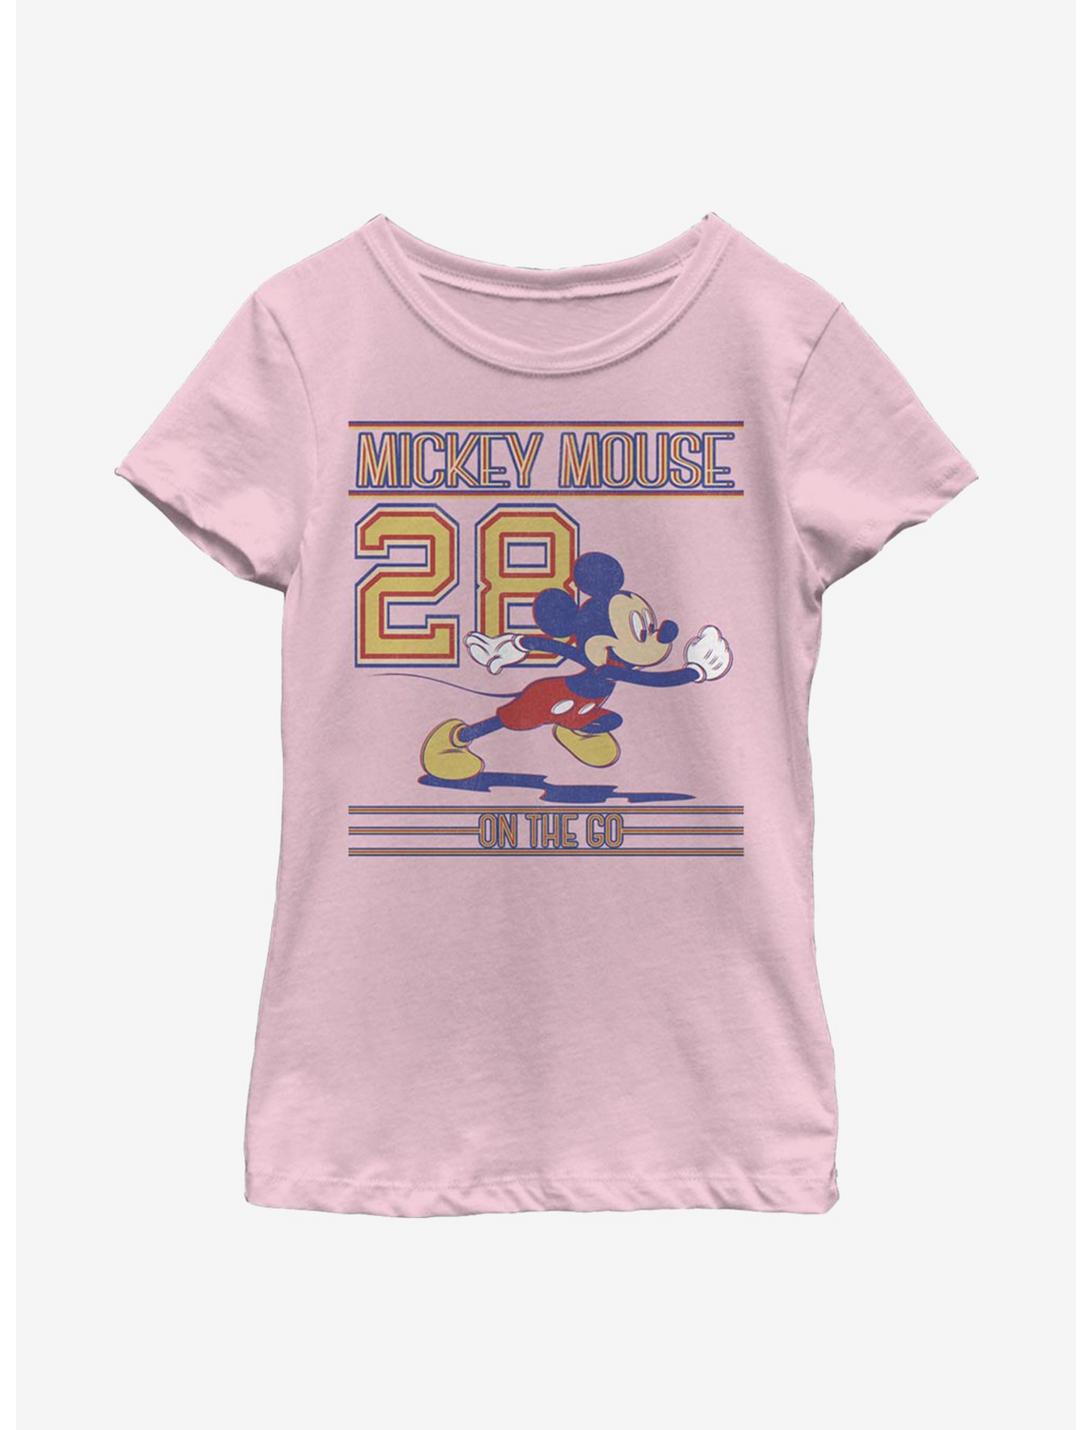 Disney Mickey Mouse Since 28 Youth Girls T-Shirt, PINK, hi-res